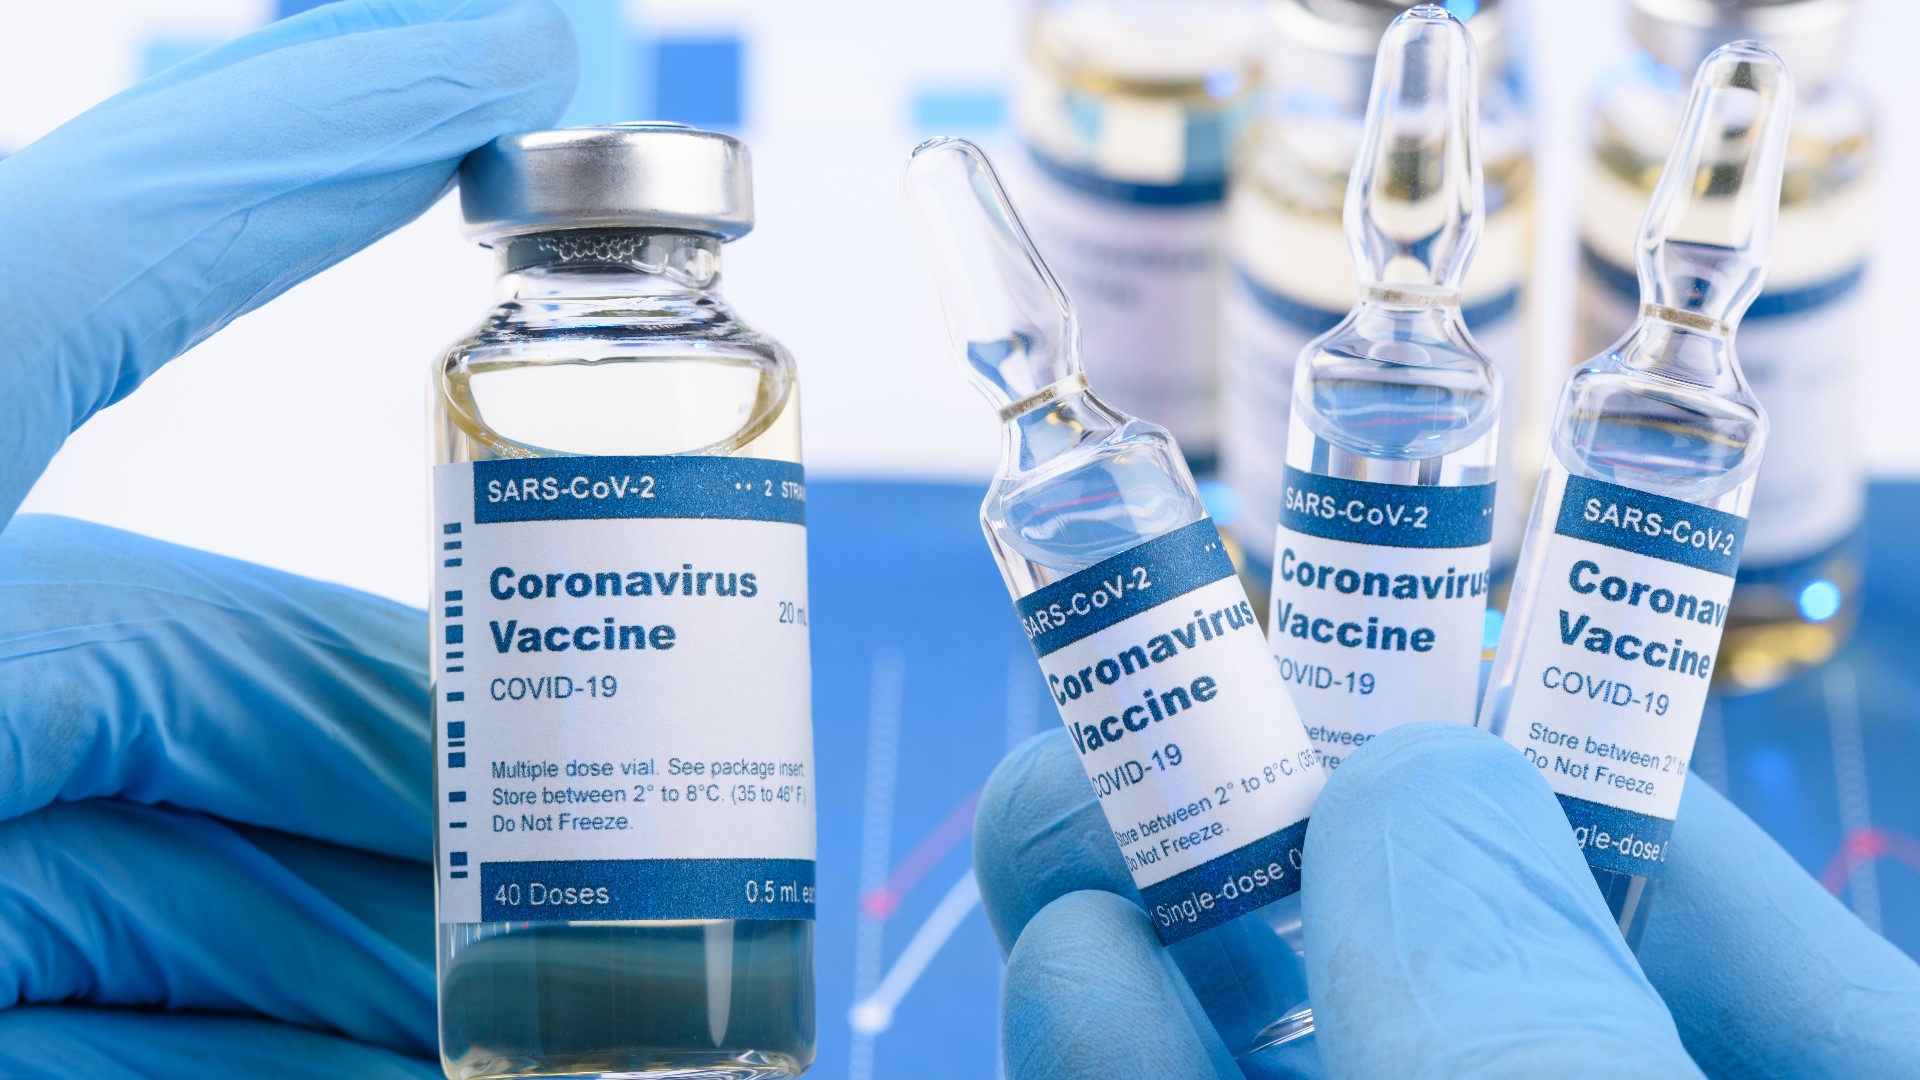 Arizona’s health department has opened eligibility for the COVID-19 vaccine to people 55 and older.